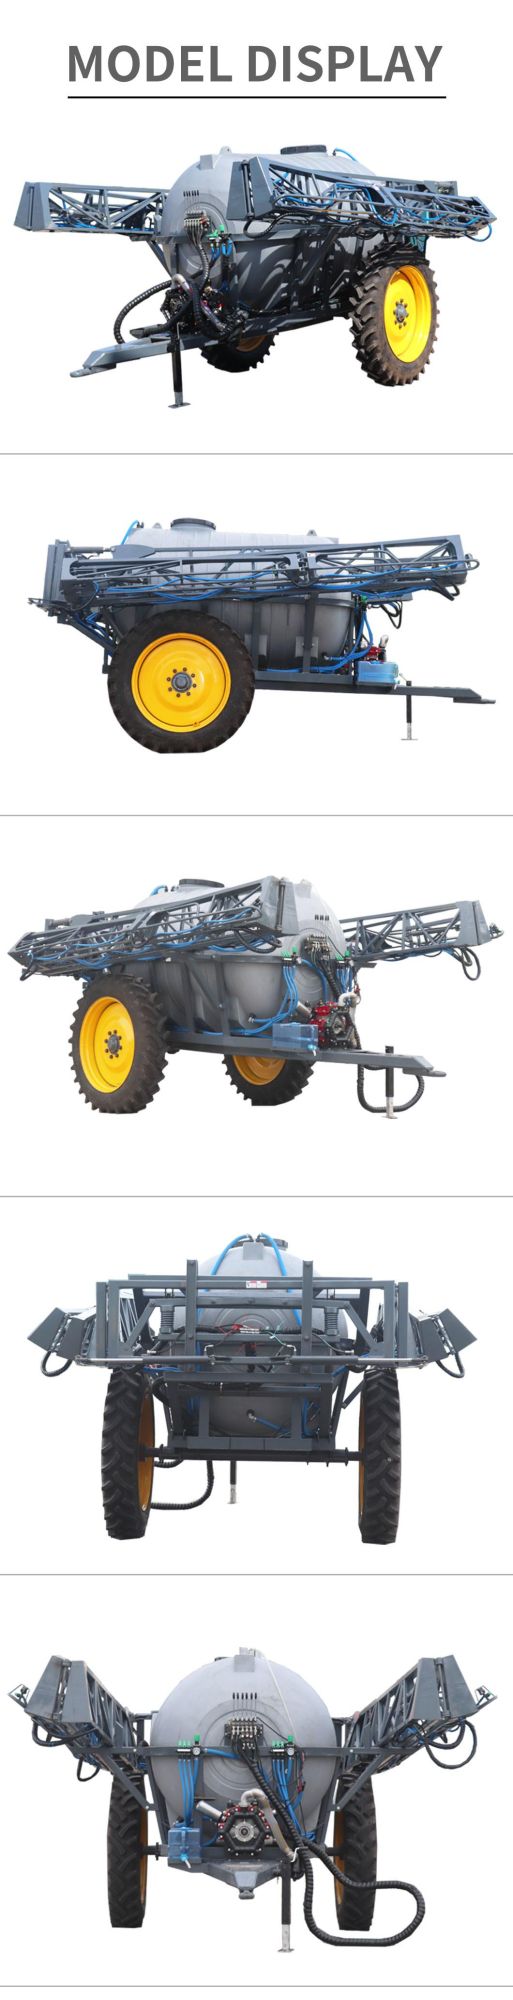 Drawn Farm Field Soybean Wheat 4WD Power Tractor Mounted Boom Agricultural Sprayer